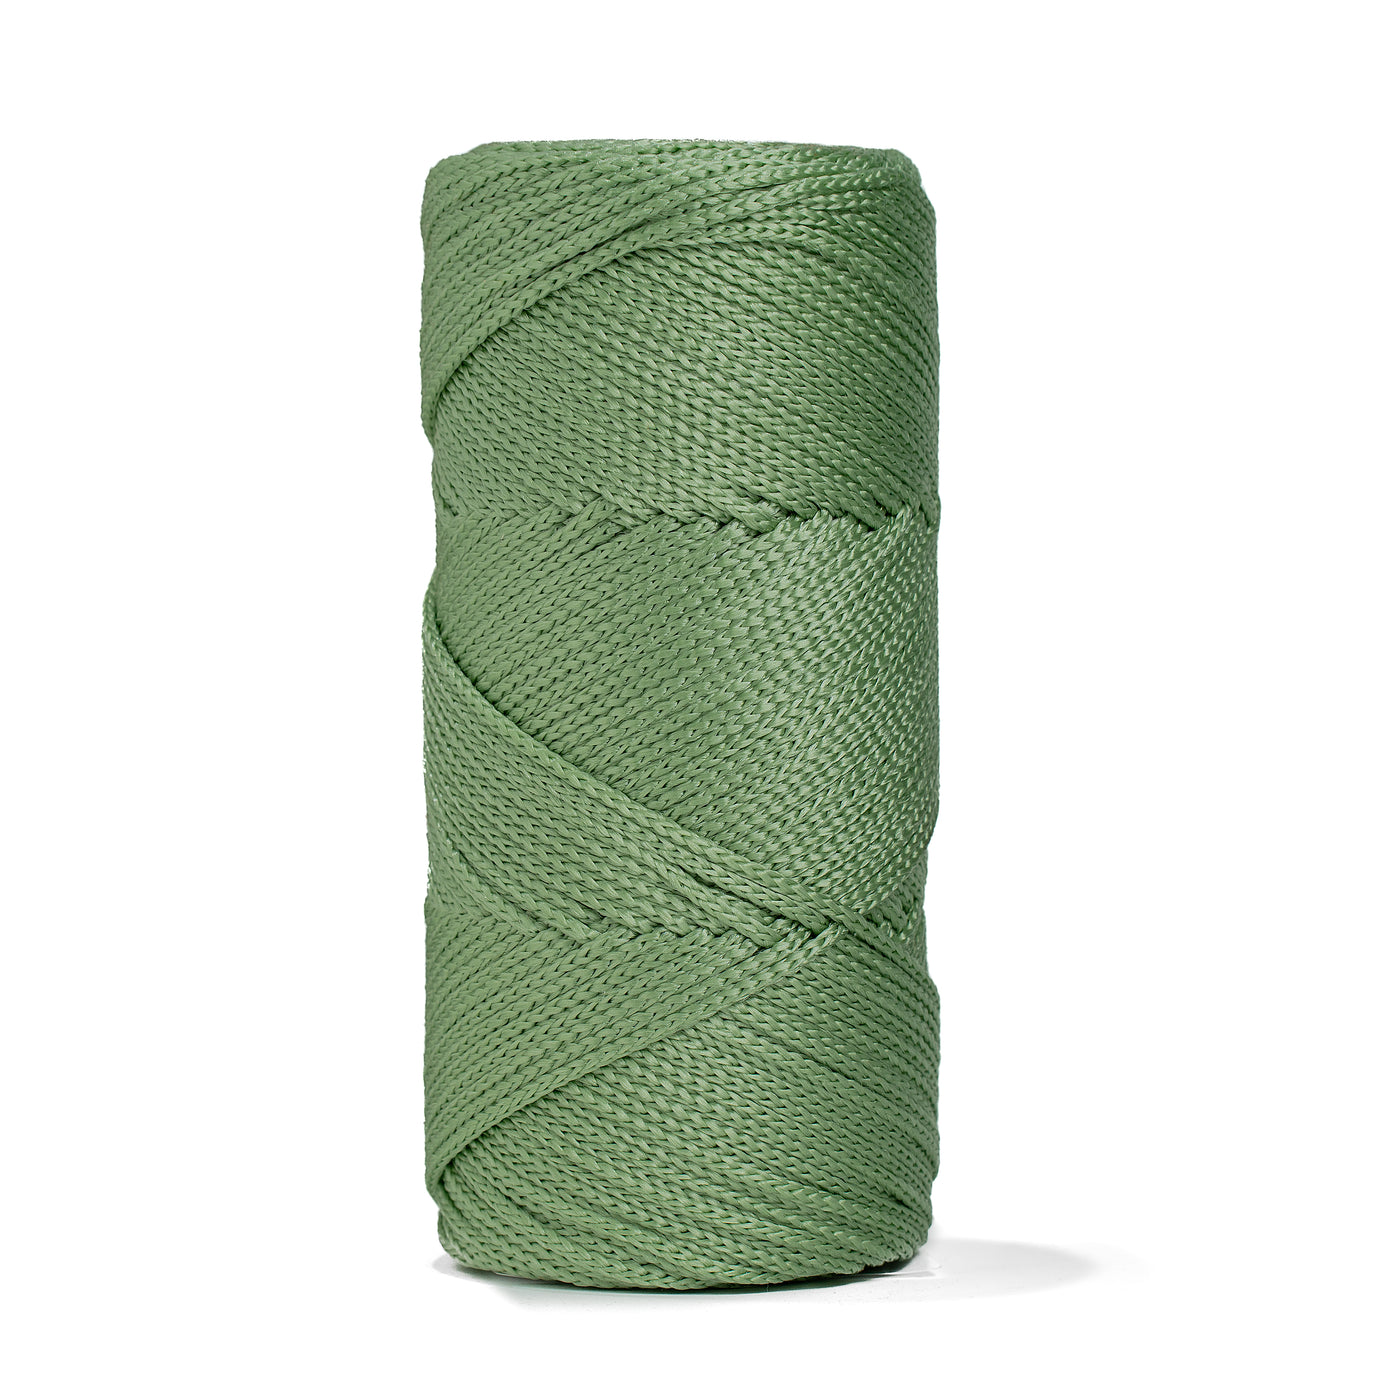 Outdoor 3 mm Macrame Braided Cord – Moss Green Color